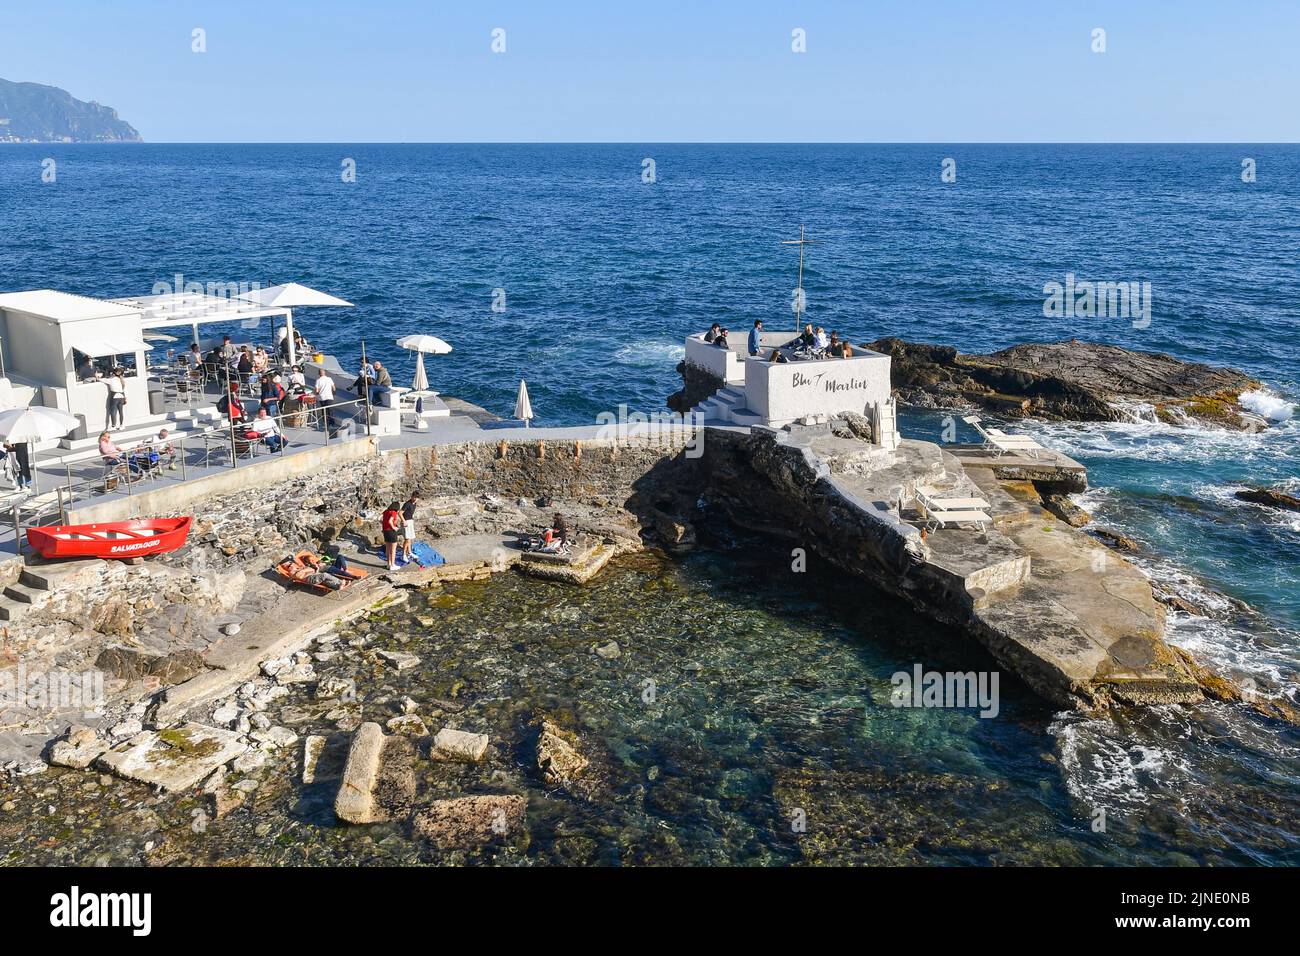 High-angle view of a beach bar on the cliff with people and the promontory of Portofino in the background, Nervi, Genoa, Liguria, Italy Stock Photo